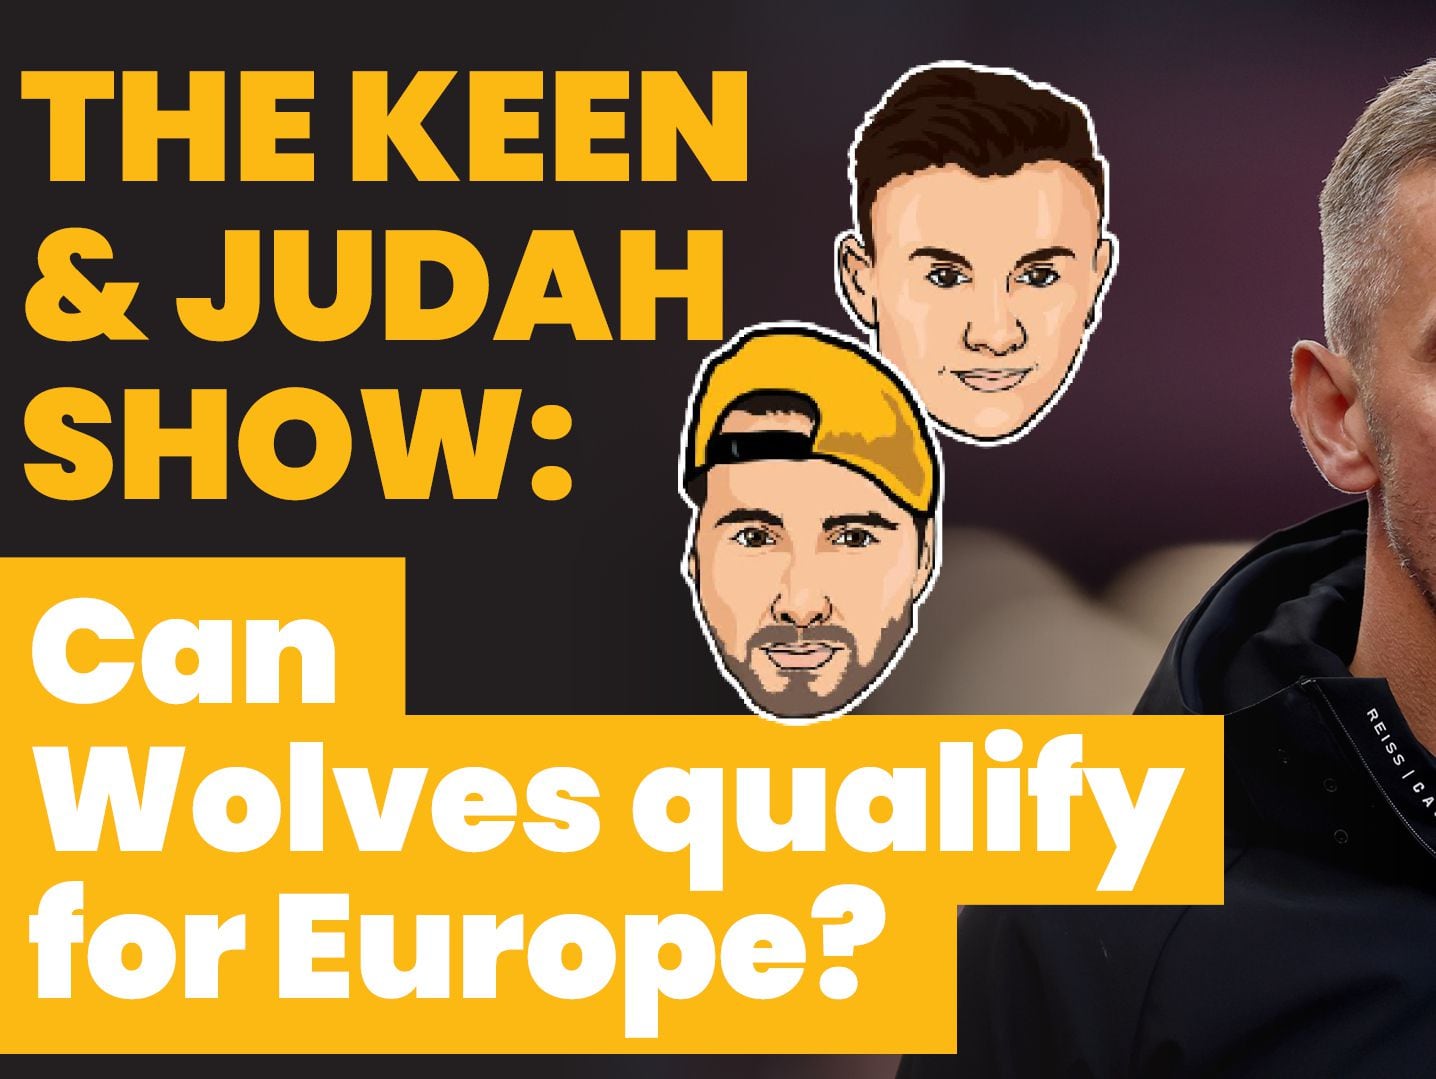 WATCH FOR FREE: The Keen & Judah show - Can Wolves qualify for Europe?

